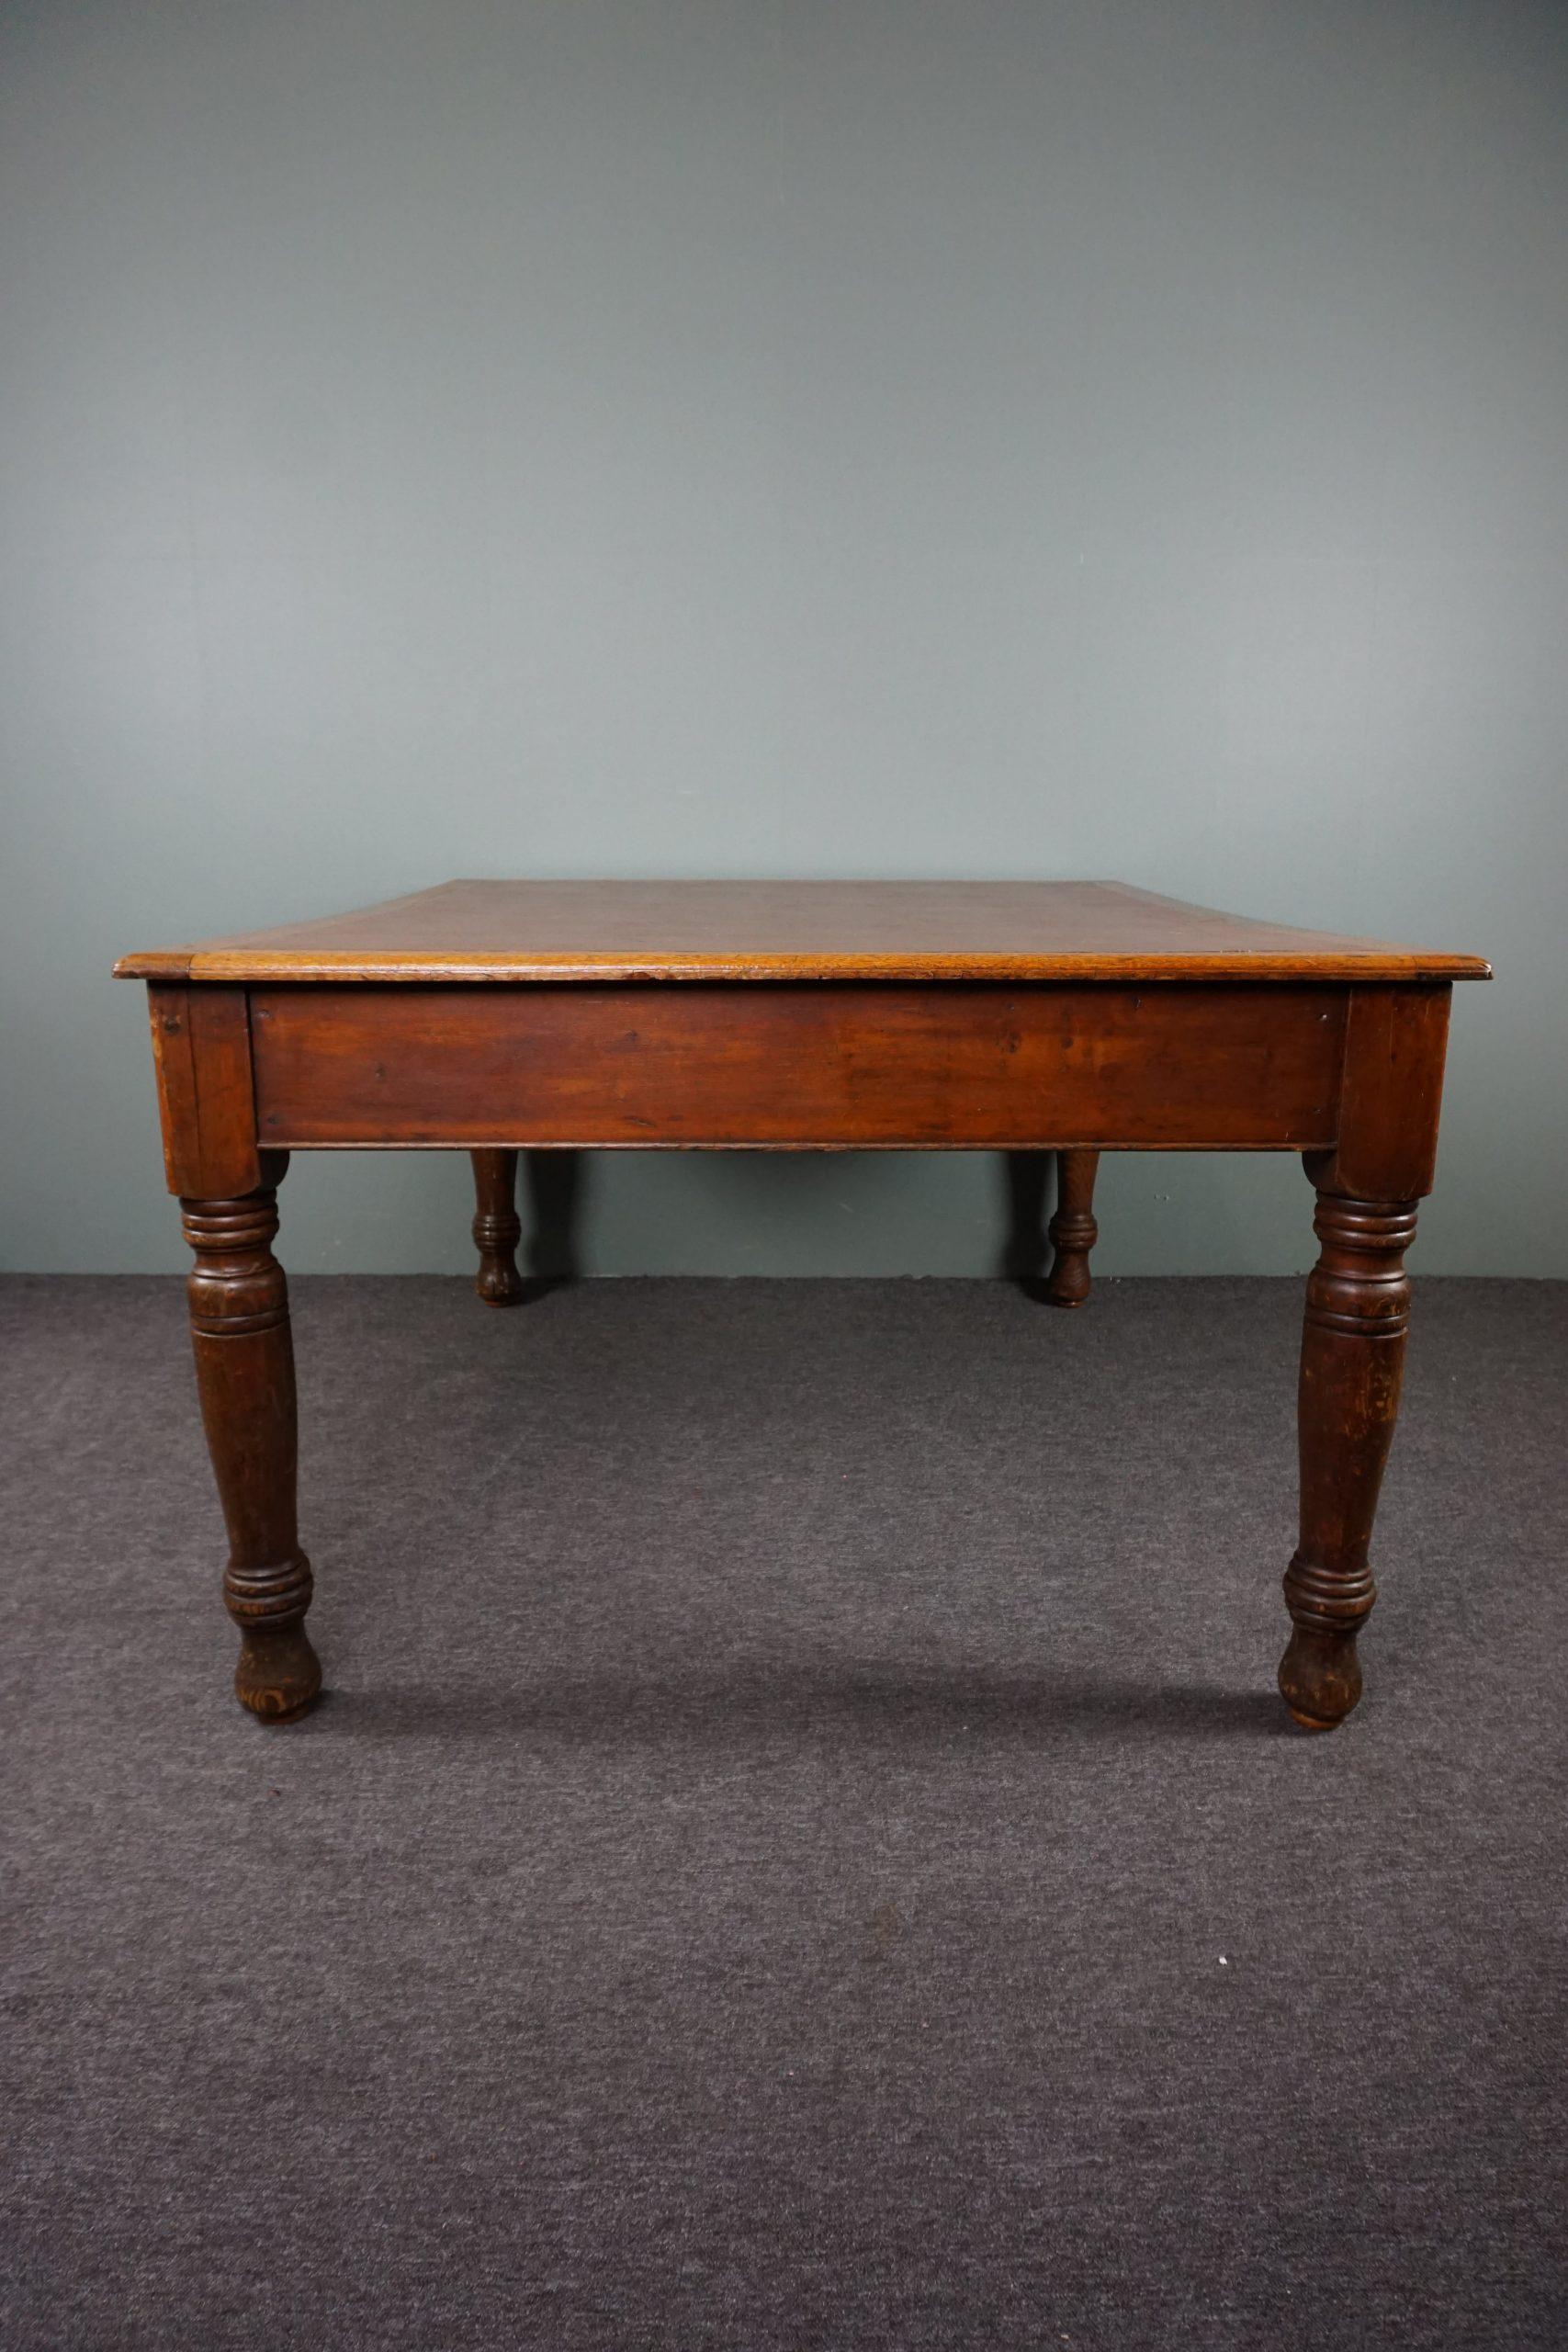 Offered is this sturdy antique writing table with a beautiful lived-in appearance.

This is a fantastic and completely original early 20th century writing desk supplied by Withy Grove Stores in Manchester. Withy Grove Stores originally supplied